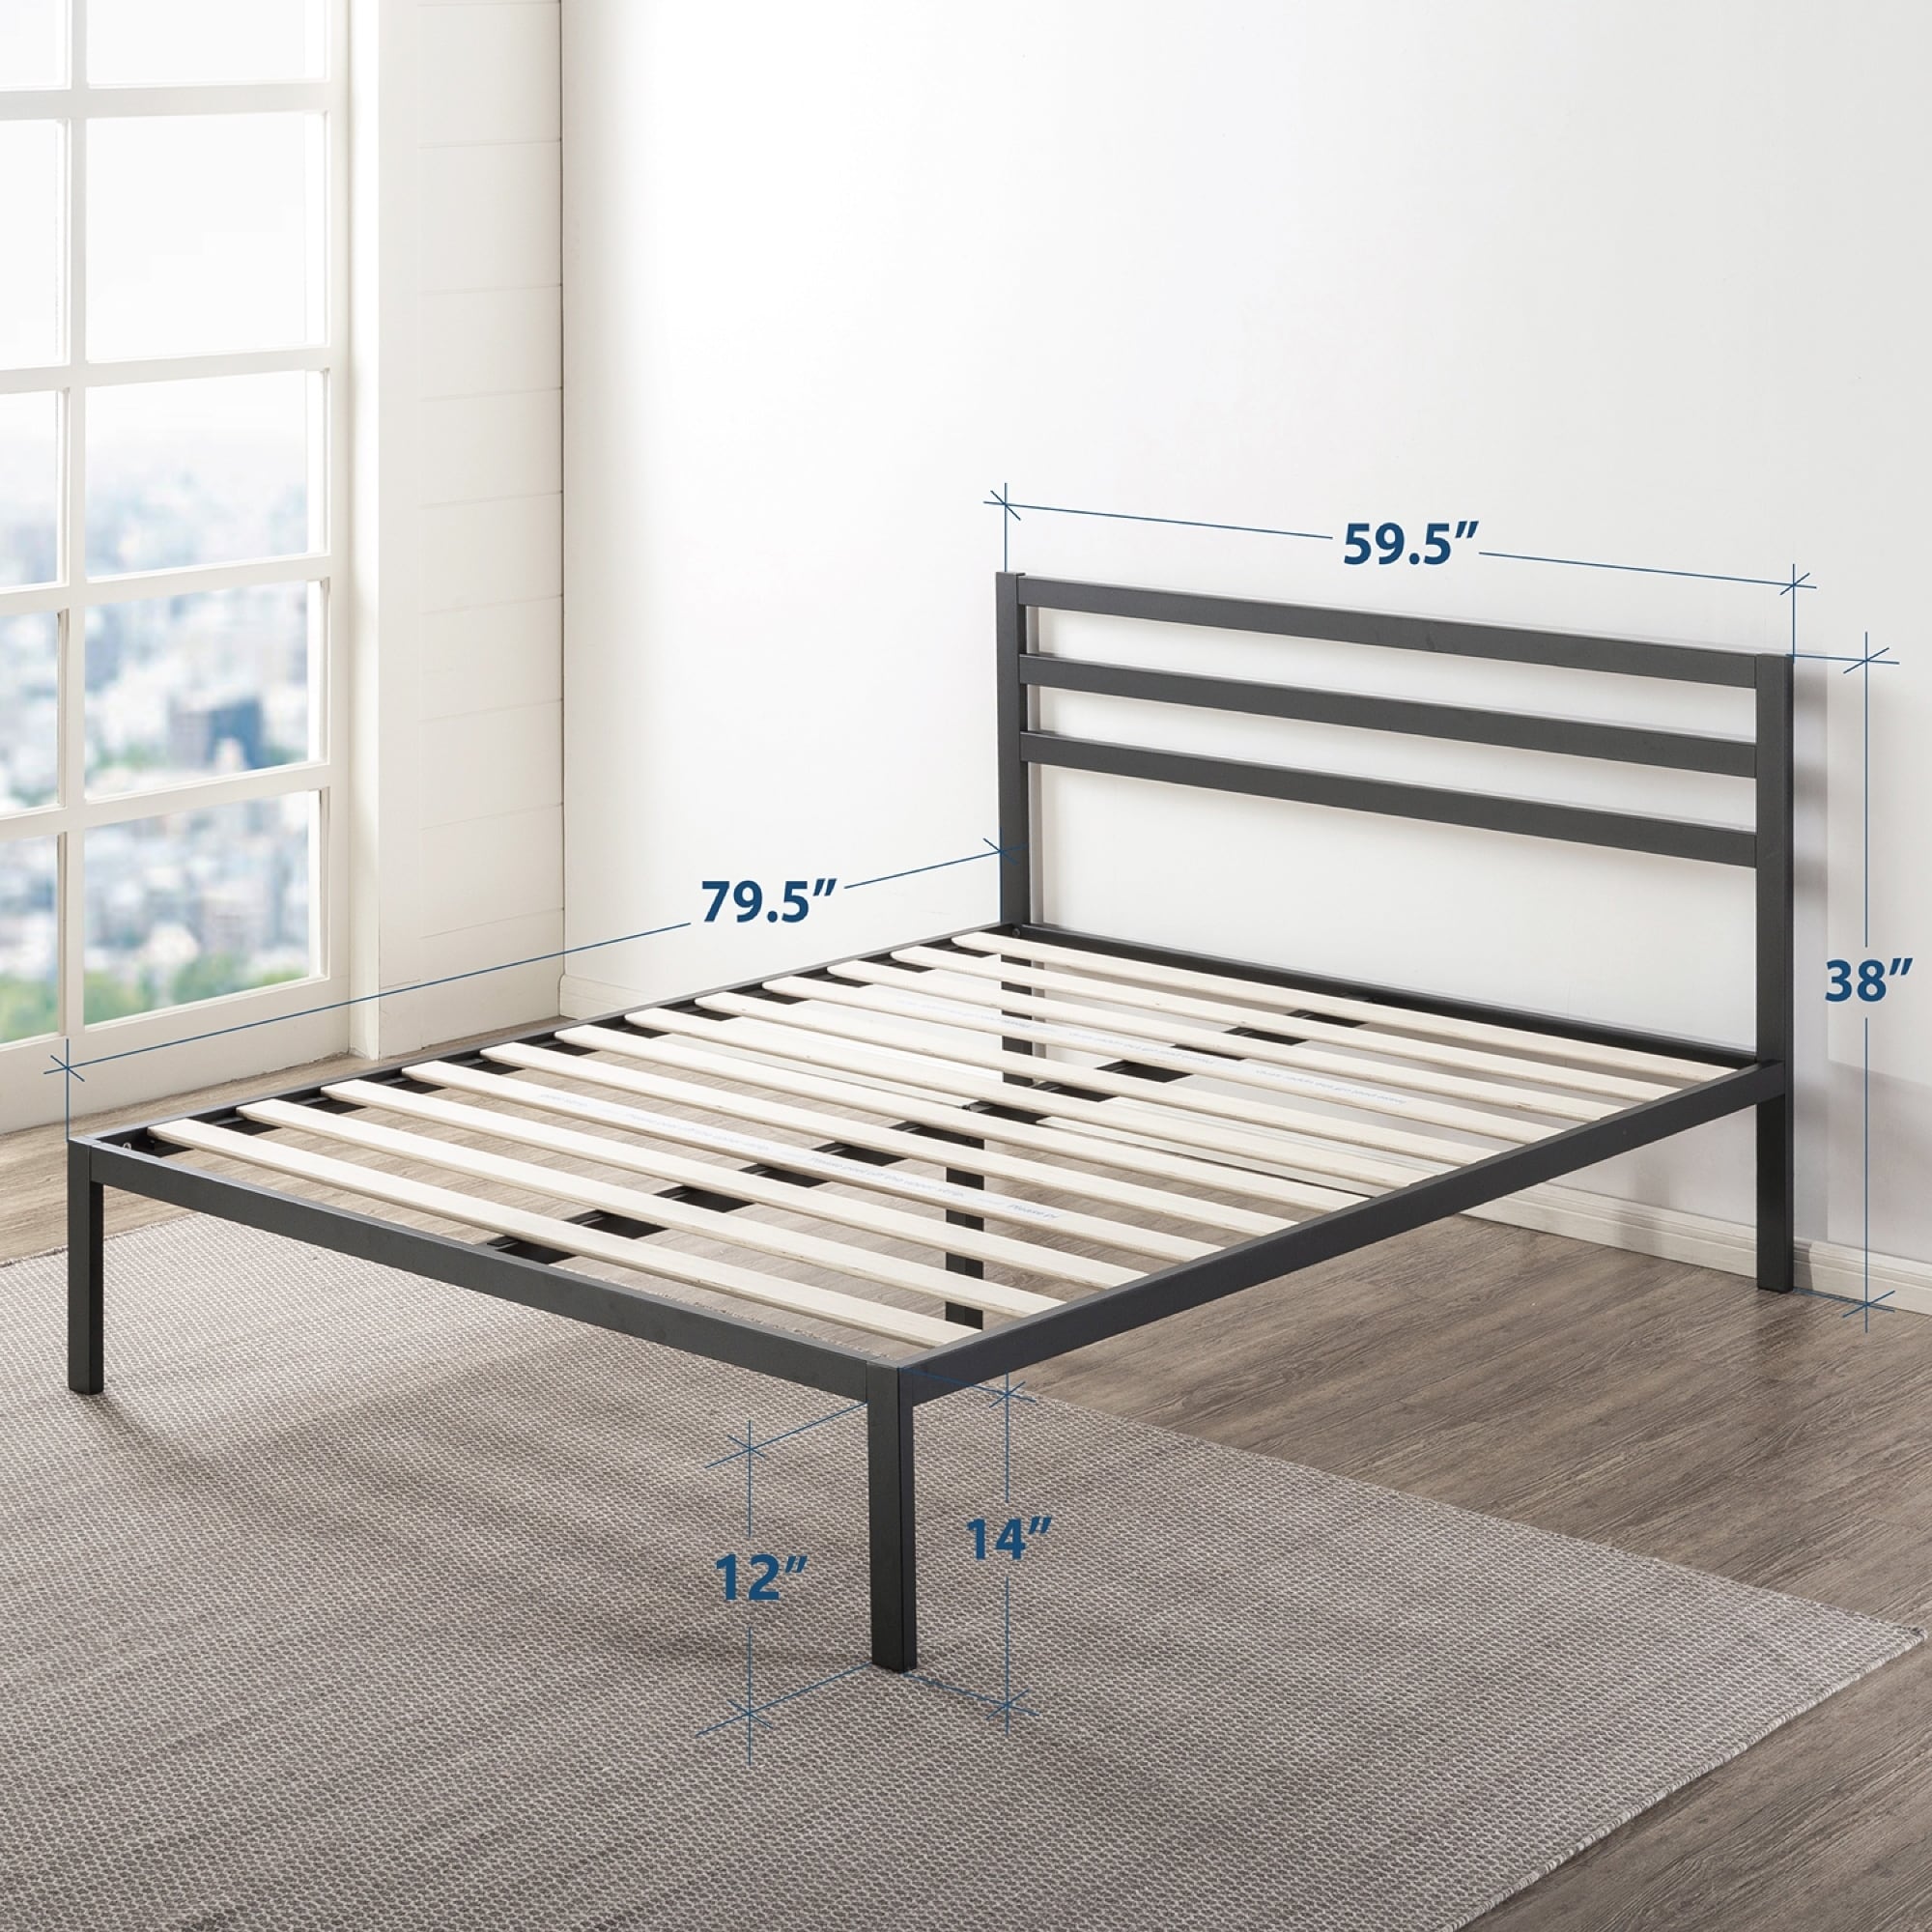 Full YITAHOME Upholstered Wingback Platform Bed with Headboard No Box Spring Needed Bed Frame with Wood Slat Mattress Foundation